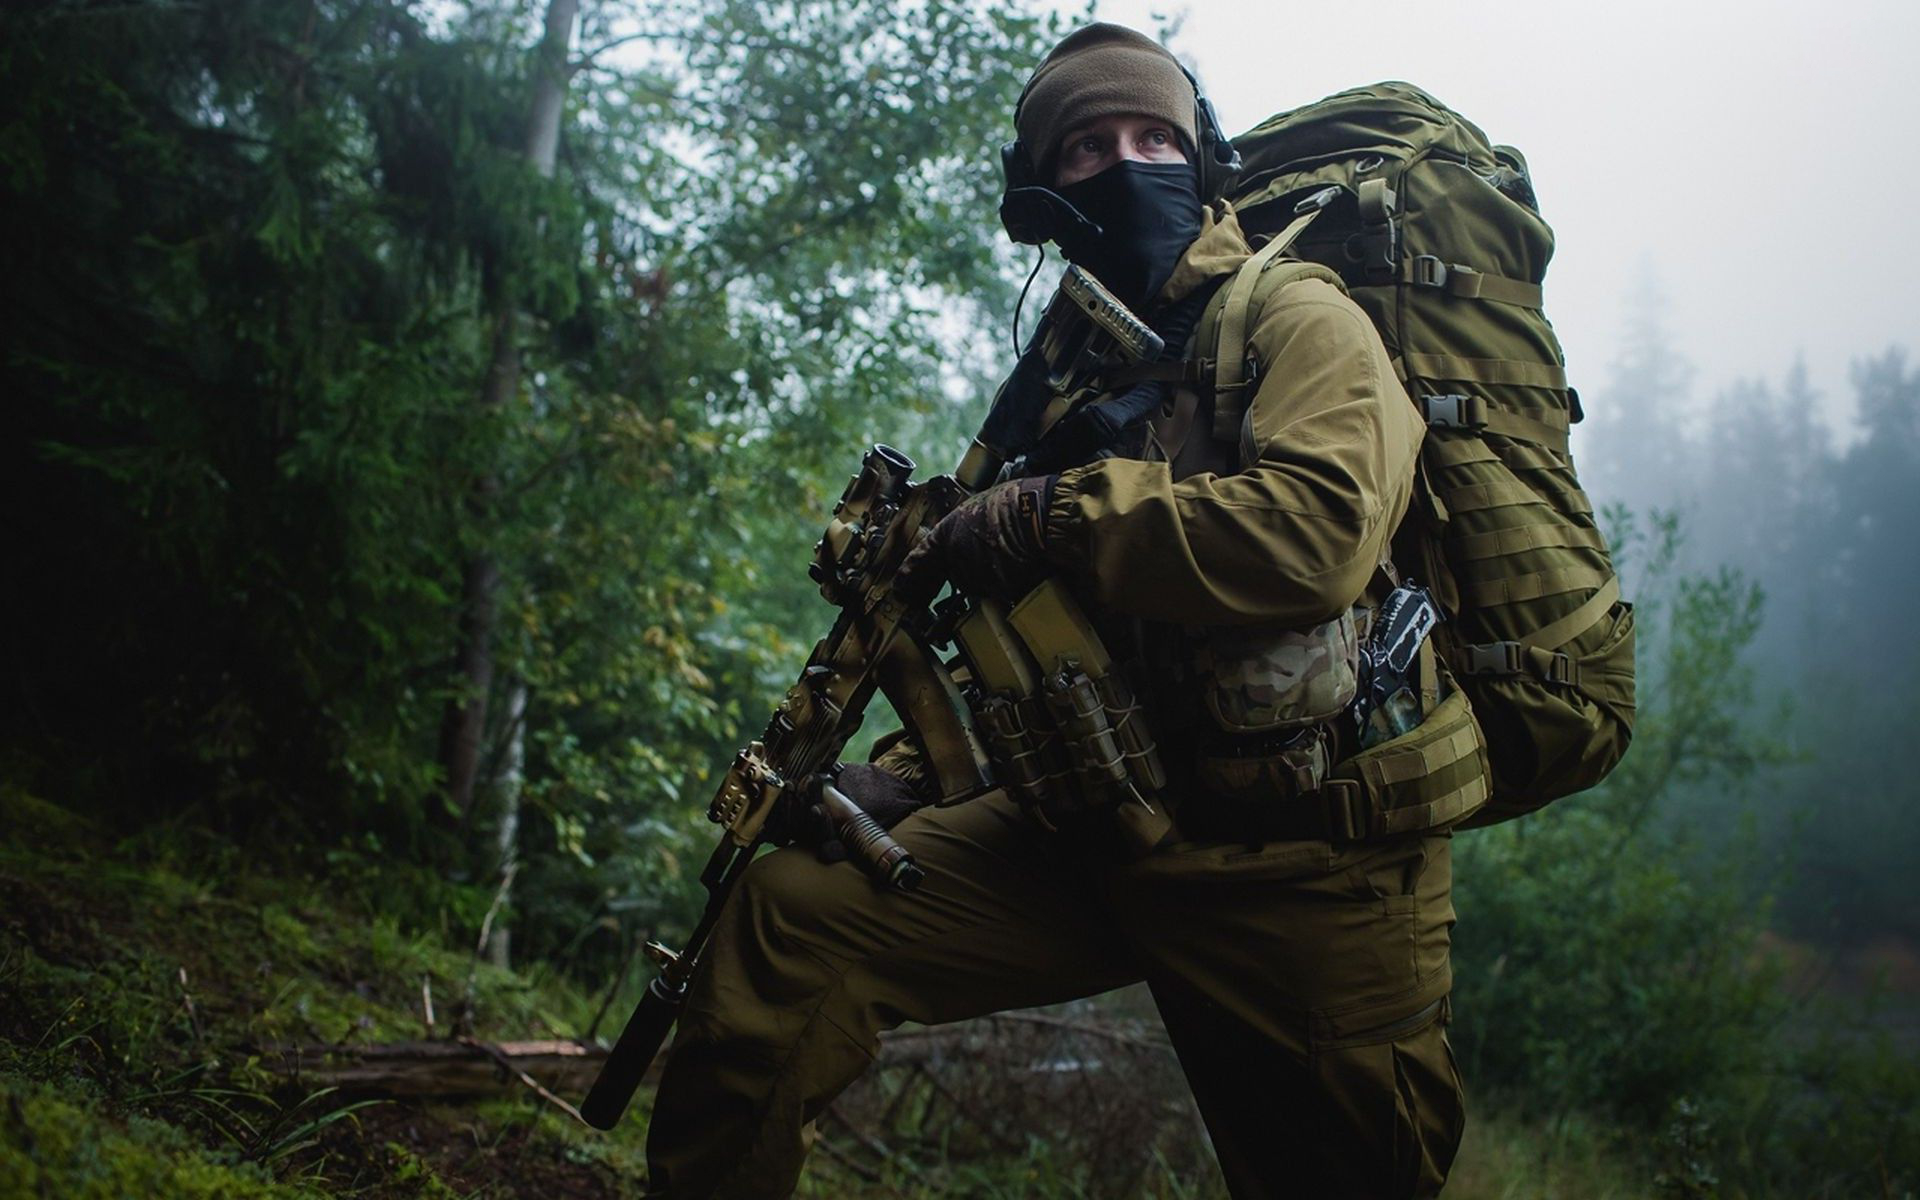 soldier wallpaper hd,soldier,airsoft,jungle,games,military